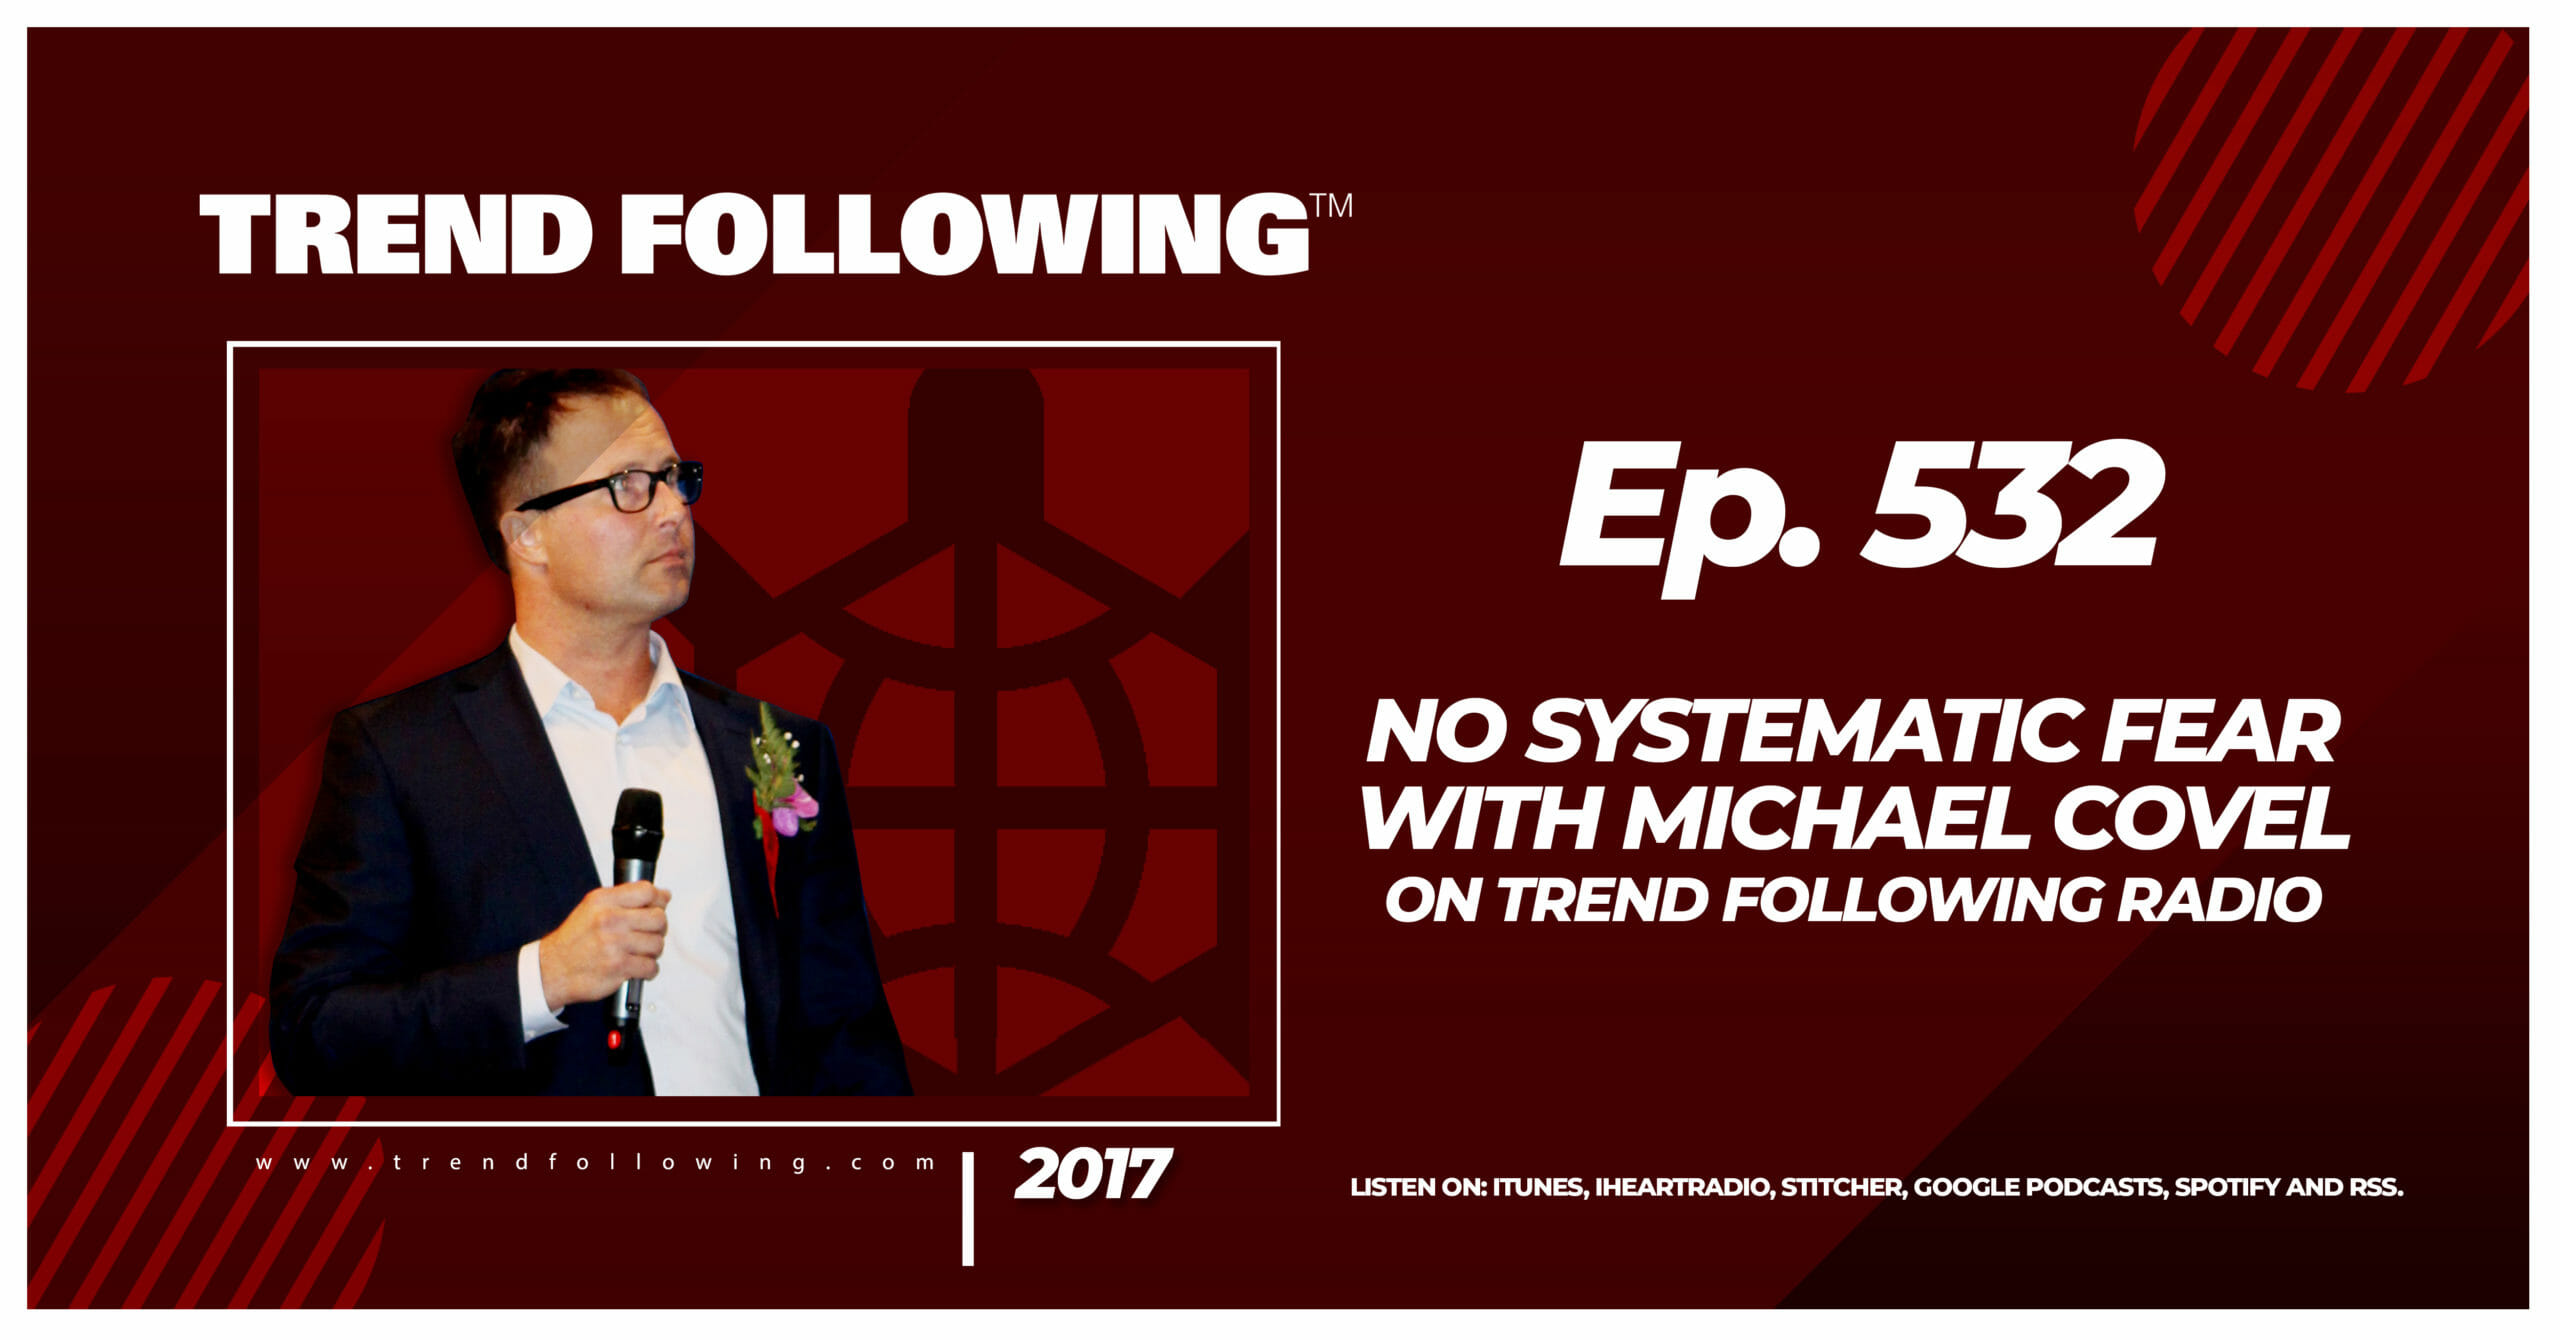 No Systematic Fear with Michael Covel on Trend Following Radio